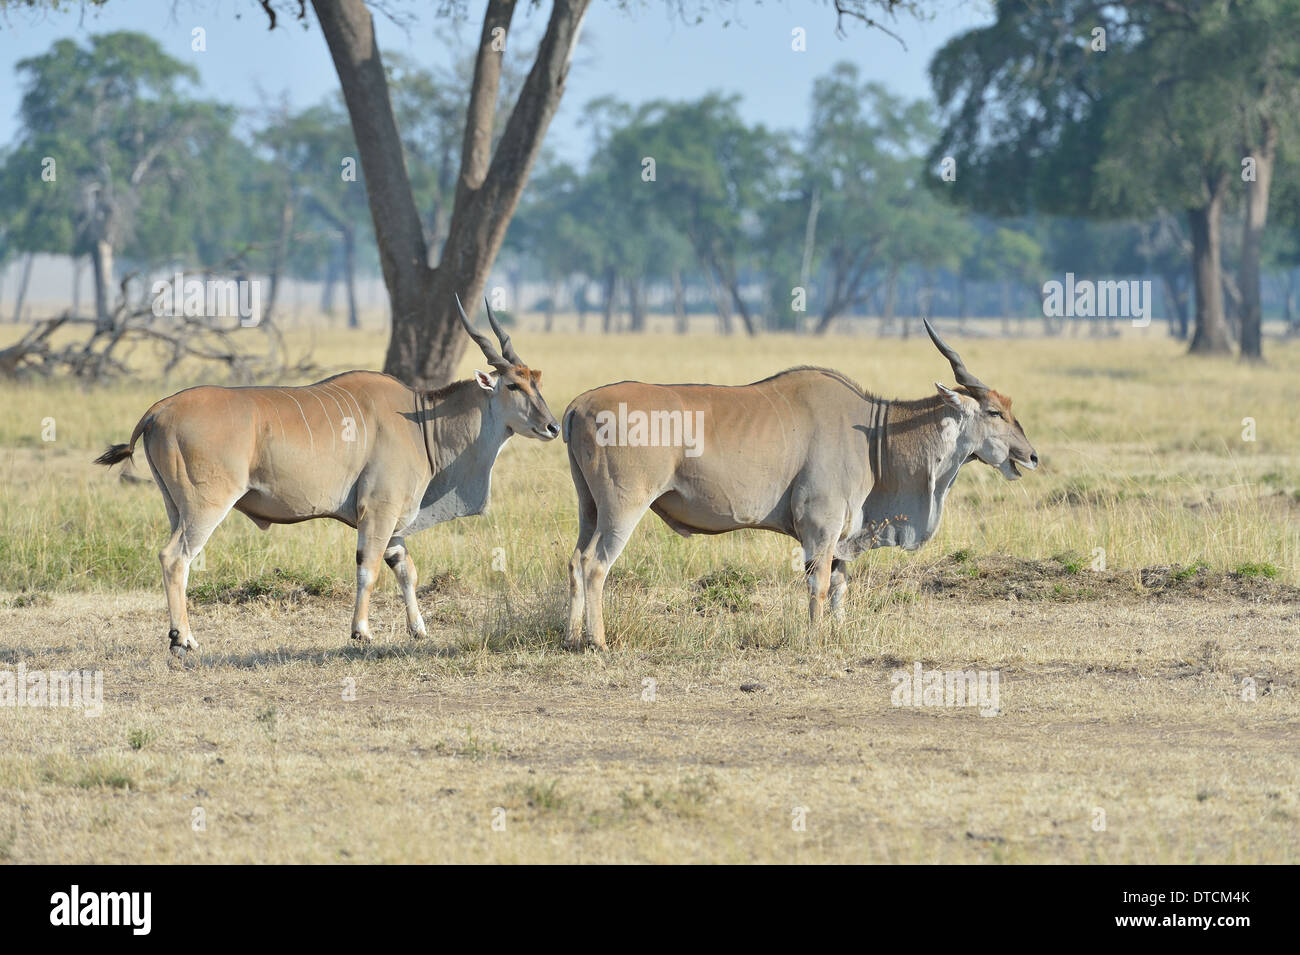 Common Eland - Southern Eland - Eland Antelope (Taurotragus oryx) the largest species of antelope pair standing in the savanna Stock Photo